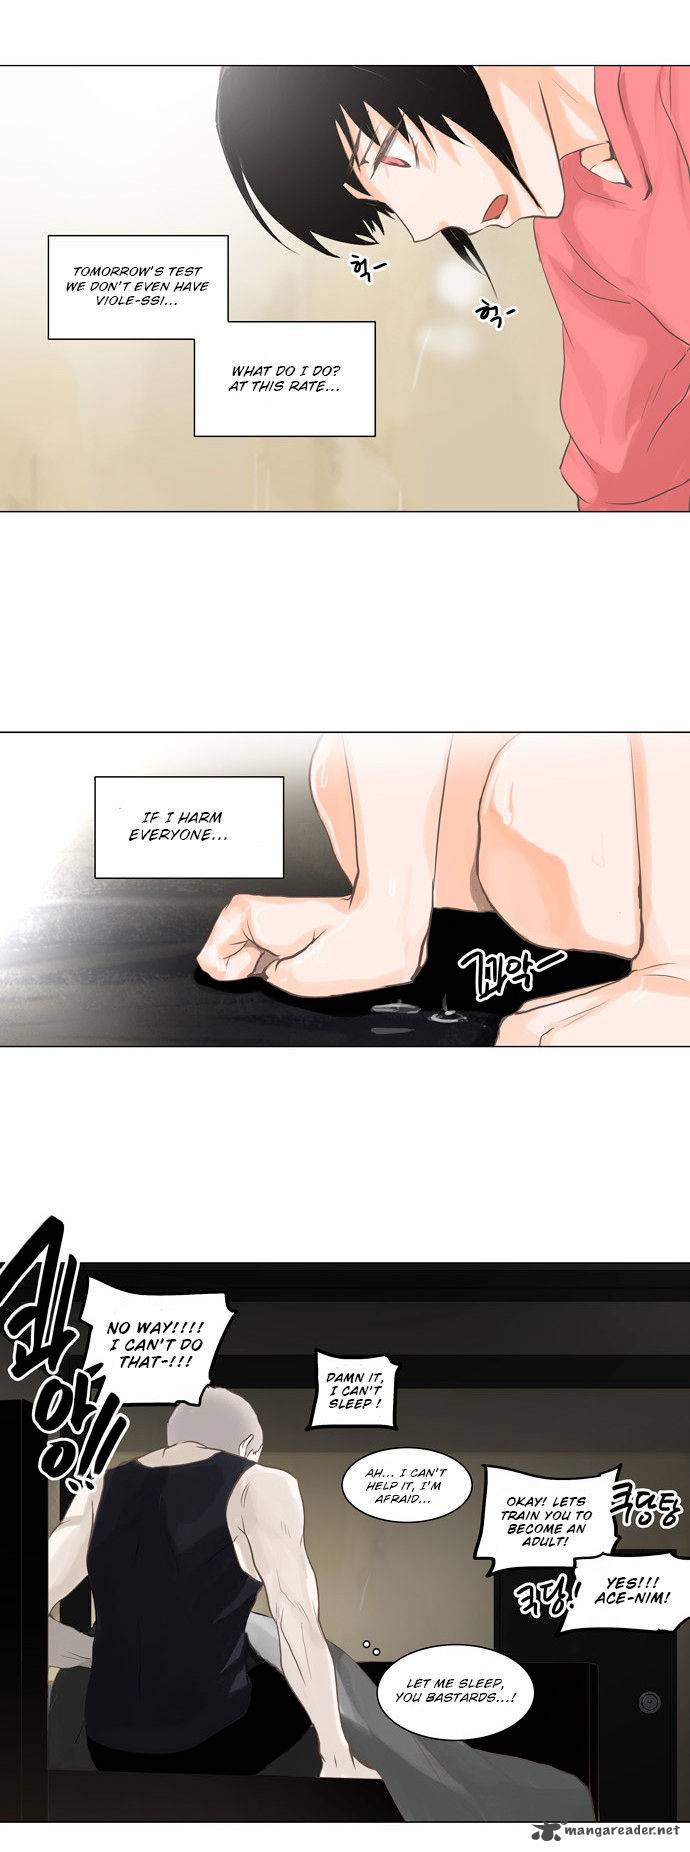 Tower Of God 135 19